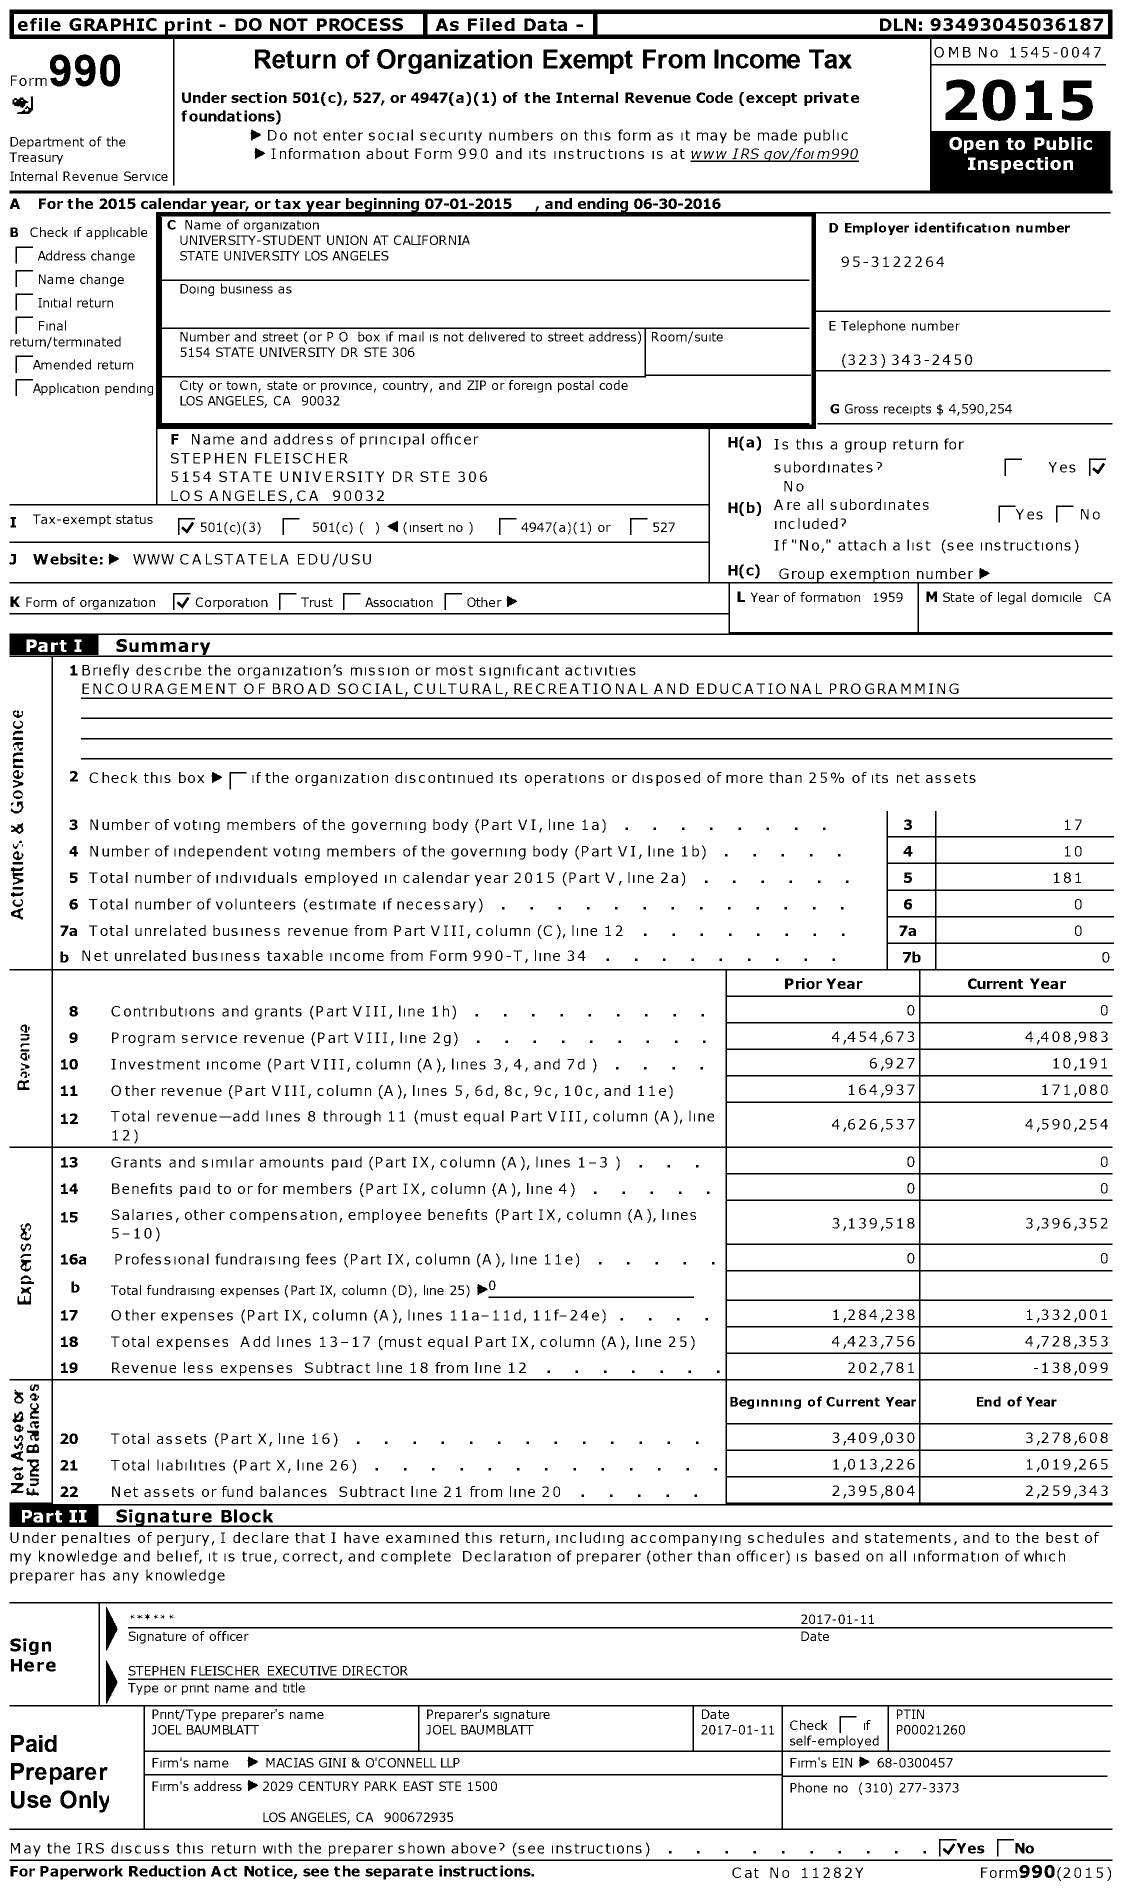 Image of first page of 2015 Form 990 for University-Student Union at California State University Los Angeles